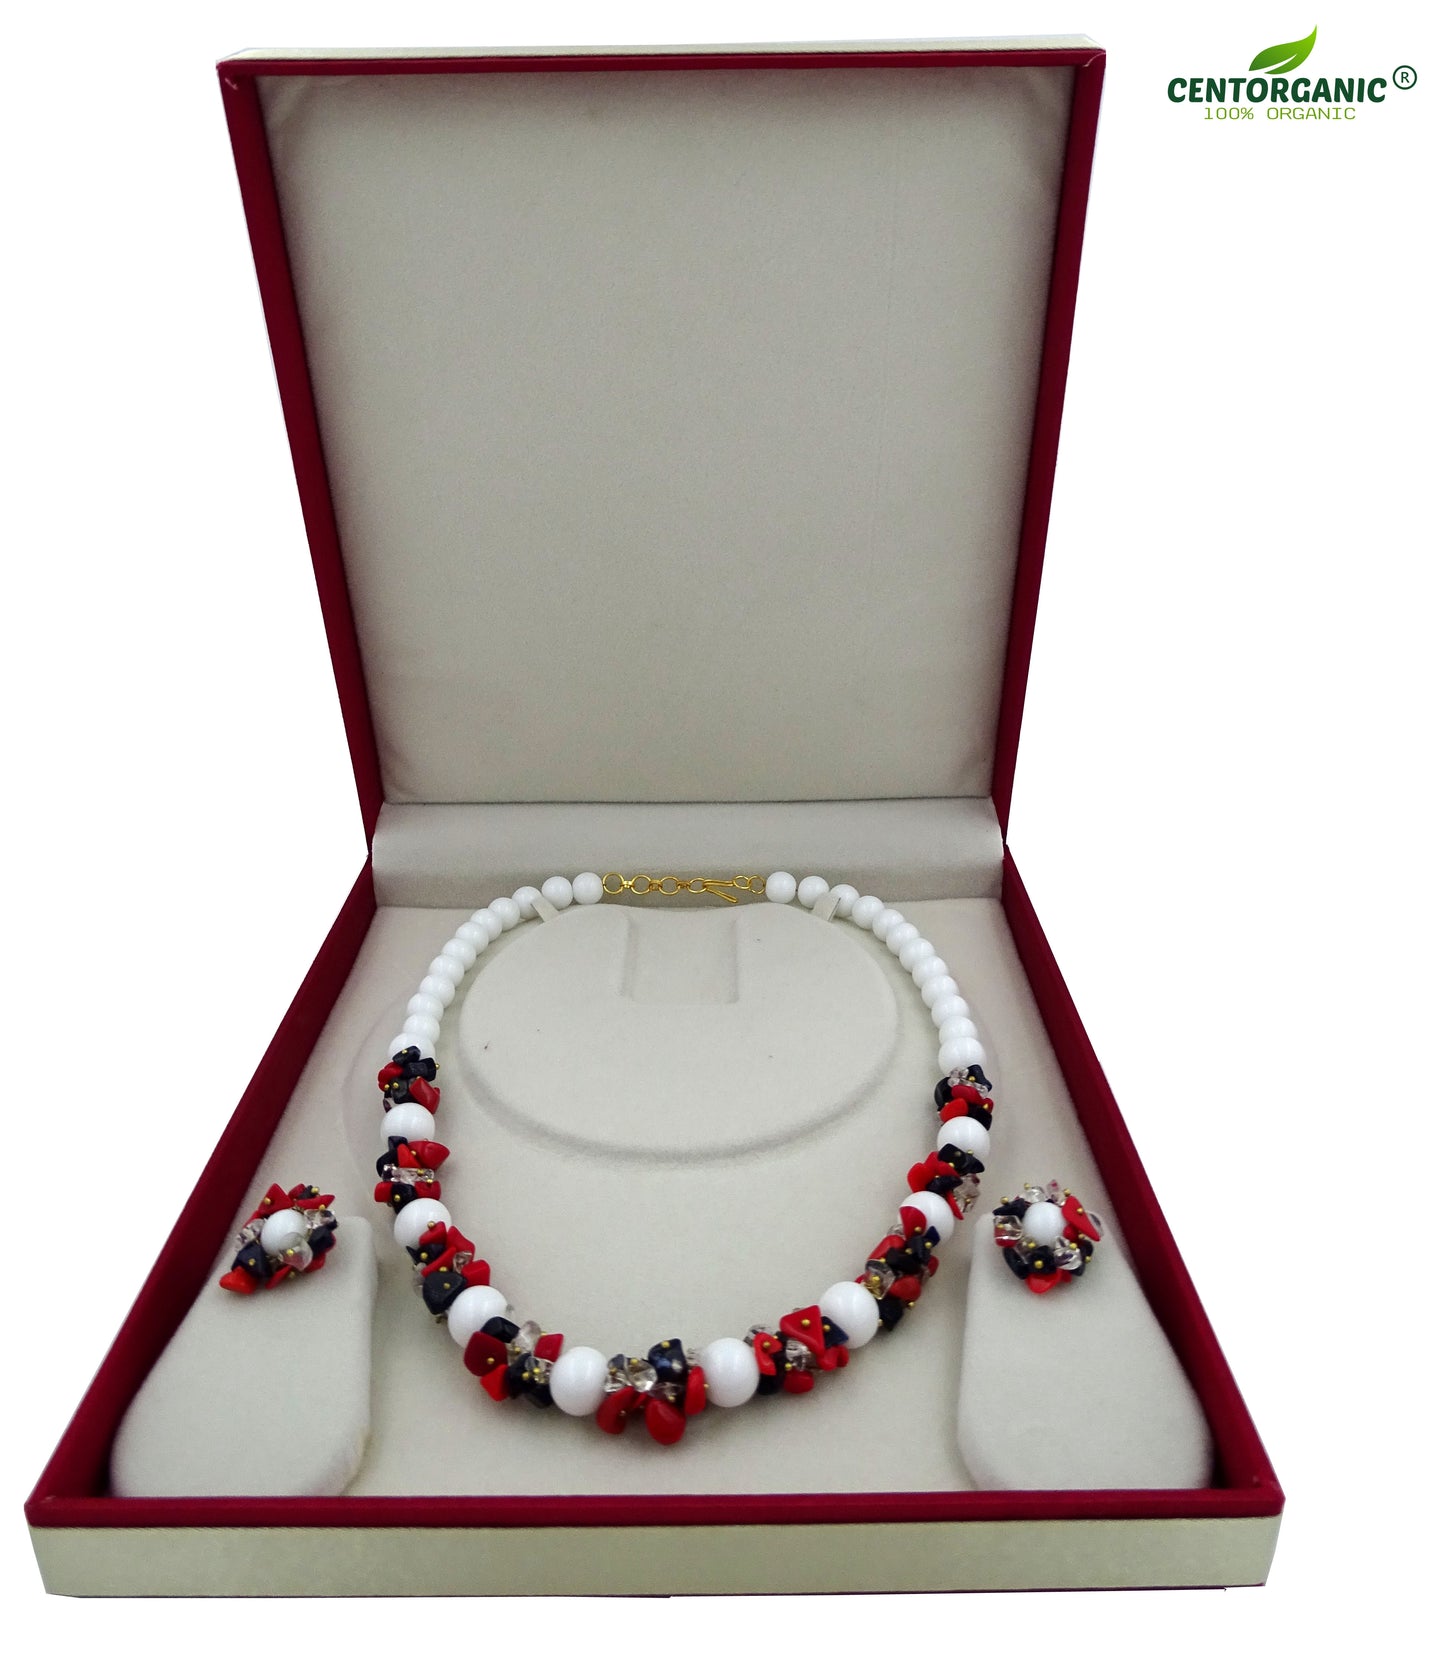 Centorganic - Semi Precious Gemstone Crystal Beads Necklace with Earring ,Red Jasper Stone chip, black Obsidian chip, clear quartz chip and white Jade length 16" Mala for Girl and Women Fashion Jewellery, with beautiful jewellery box for gifting.